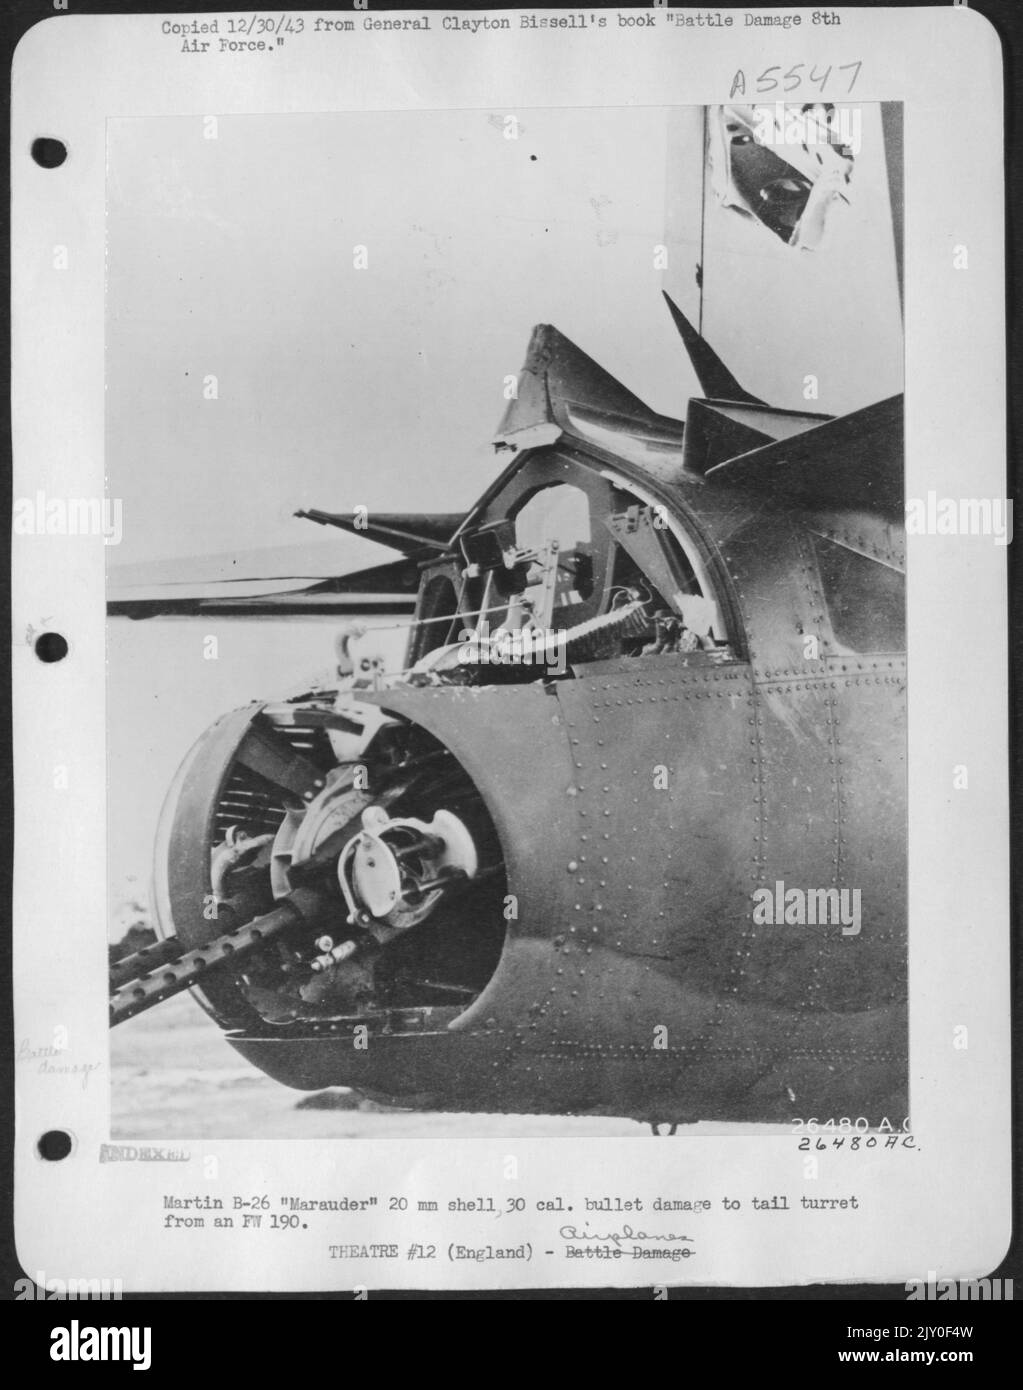 Martin B-26 'Marauder' 20 mm shell 30 cal. Bullet damage to tail turret from an FW 190. Stock Photo